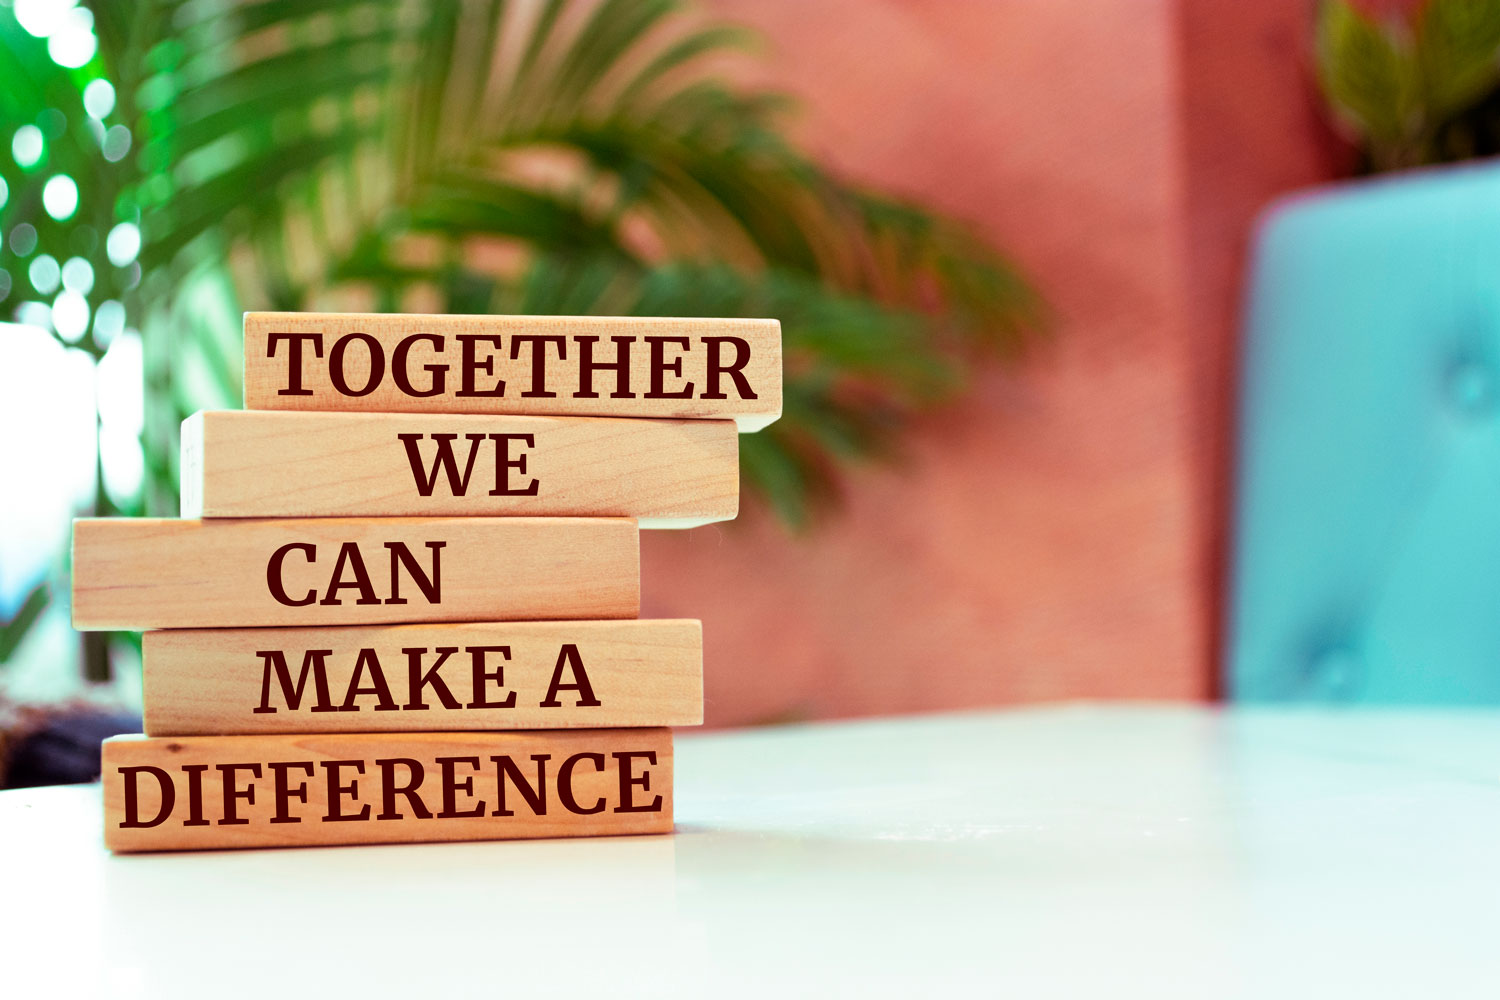 Together we can make a difference image